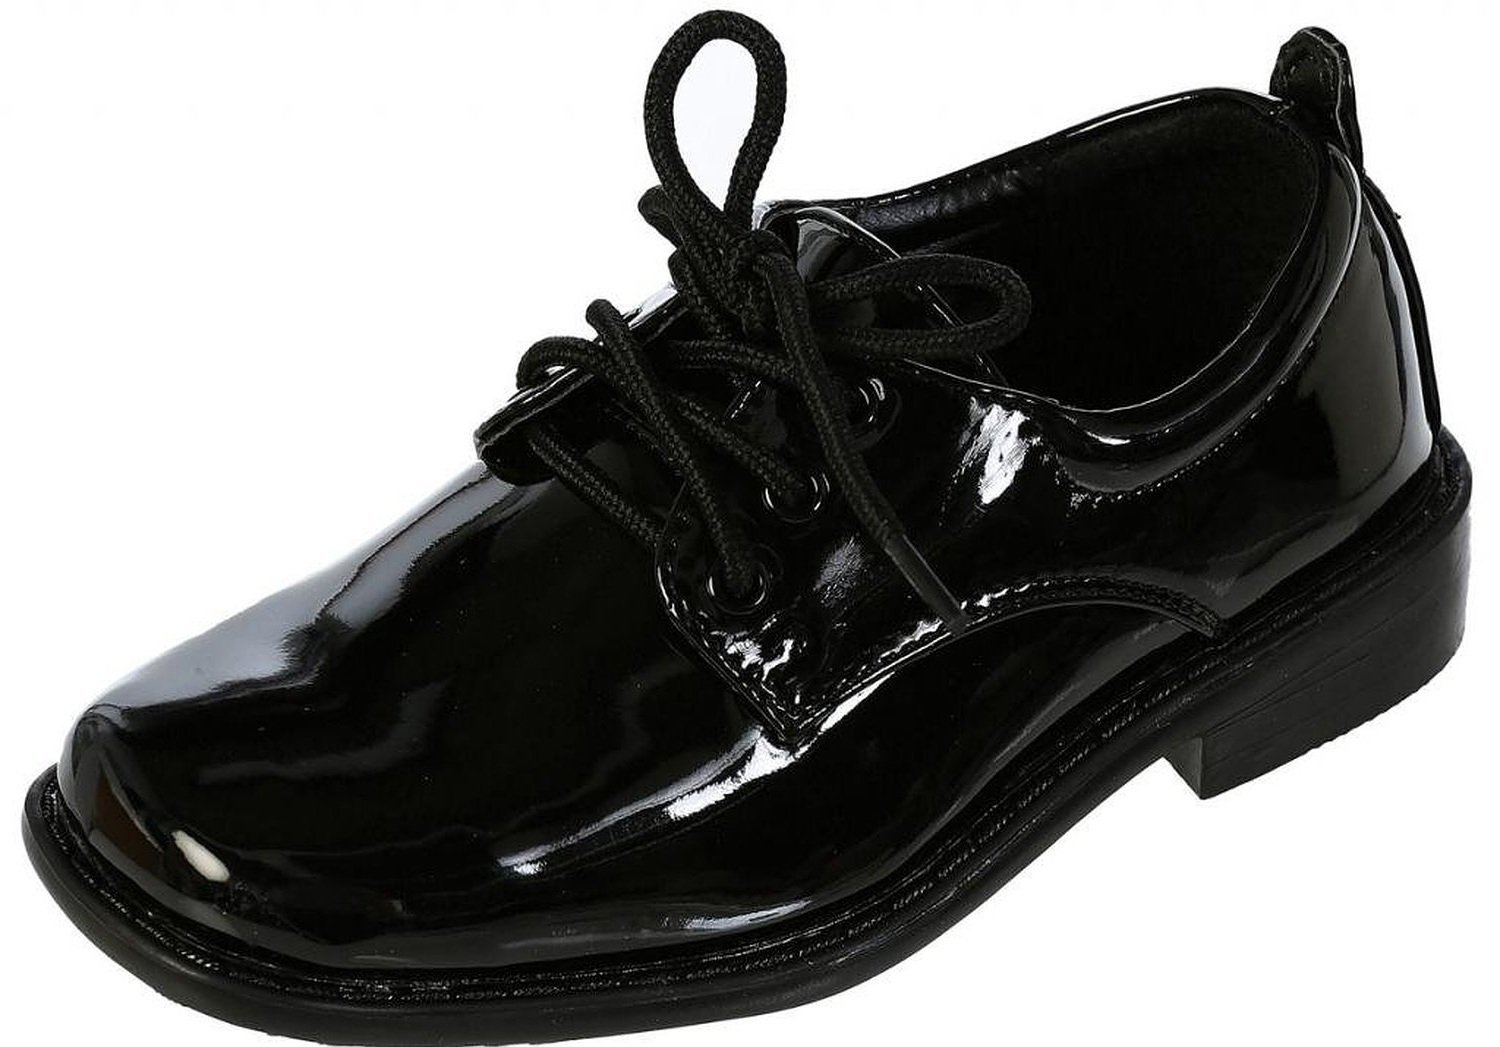 Boys Square Toe Lace Up Oxford Patent Dress Shoes - Available in Black 7 Toddler